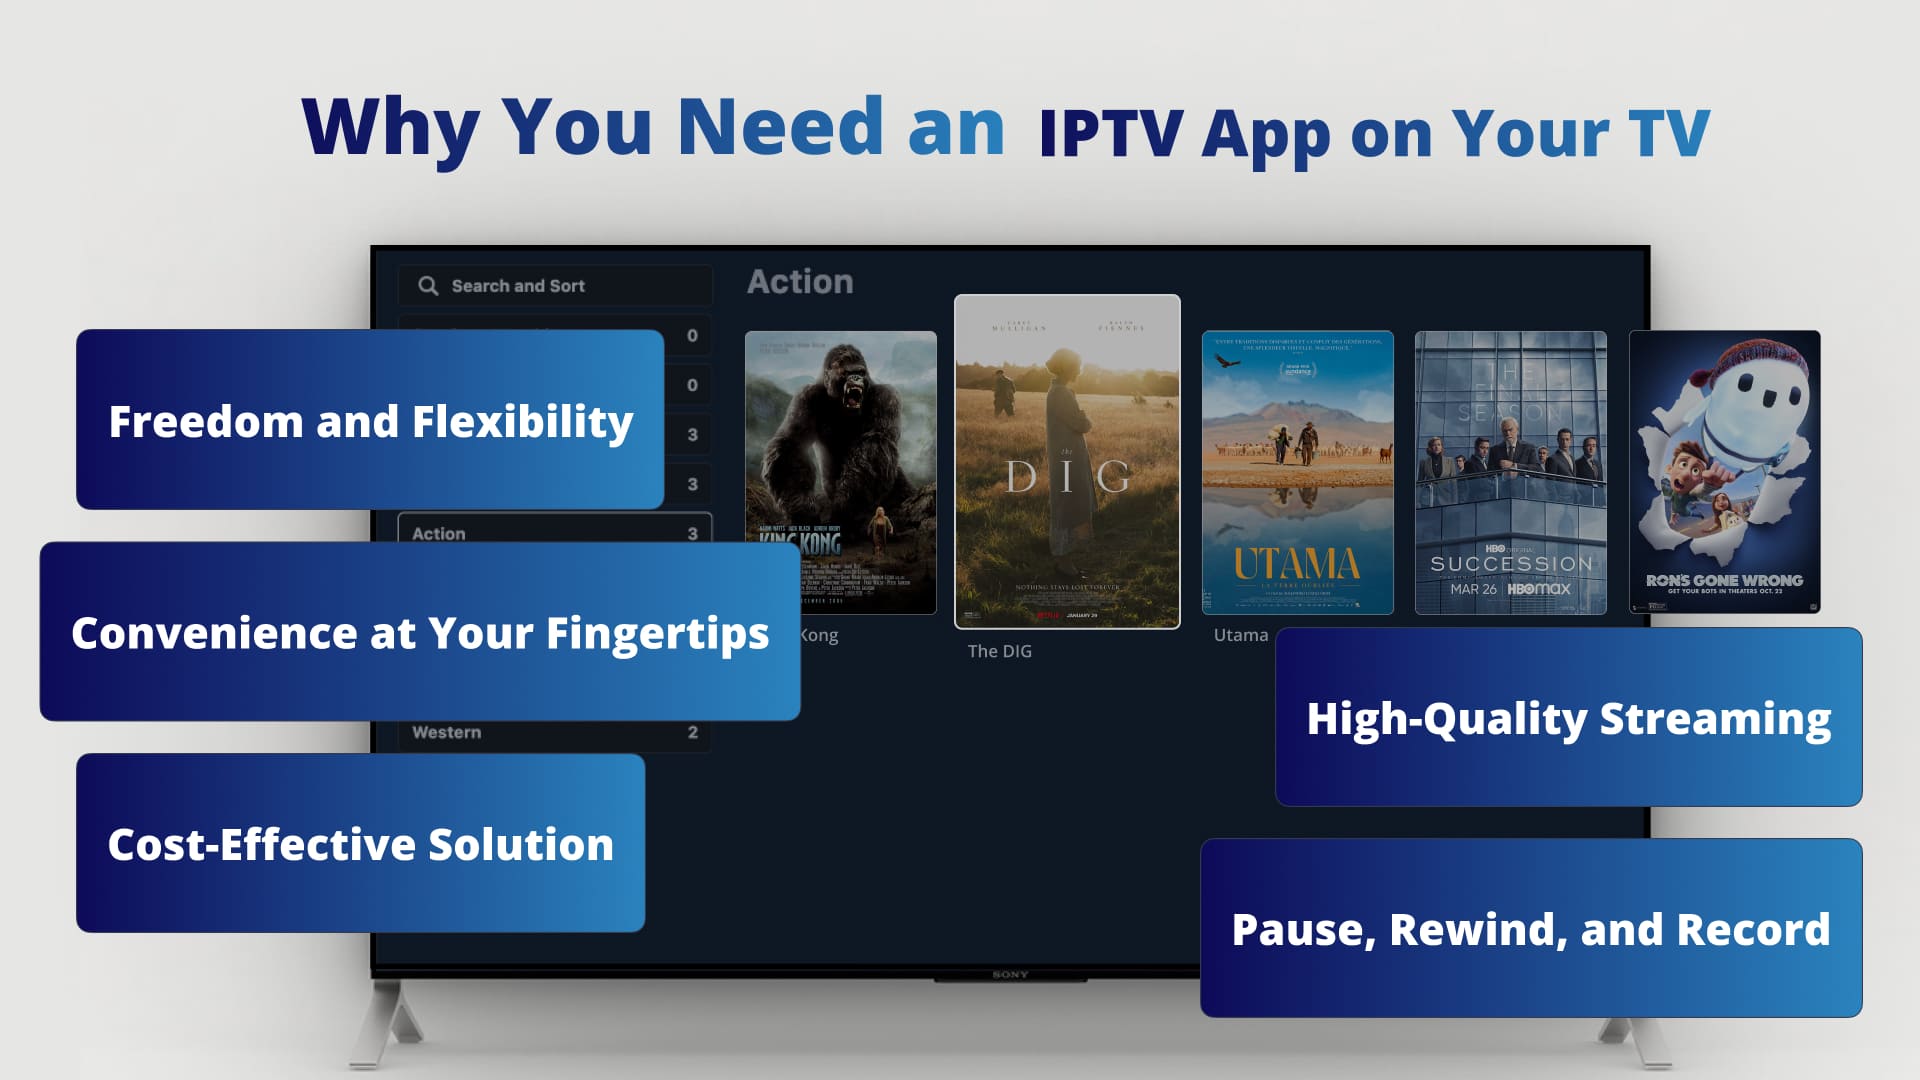 Why You Need an IPTV App on Your TV